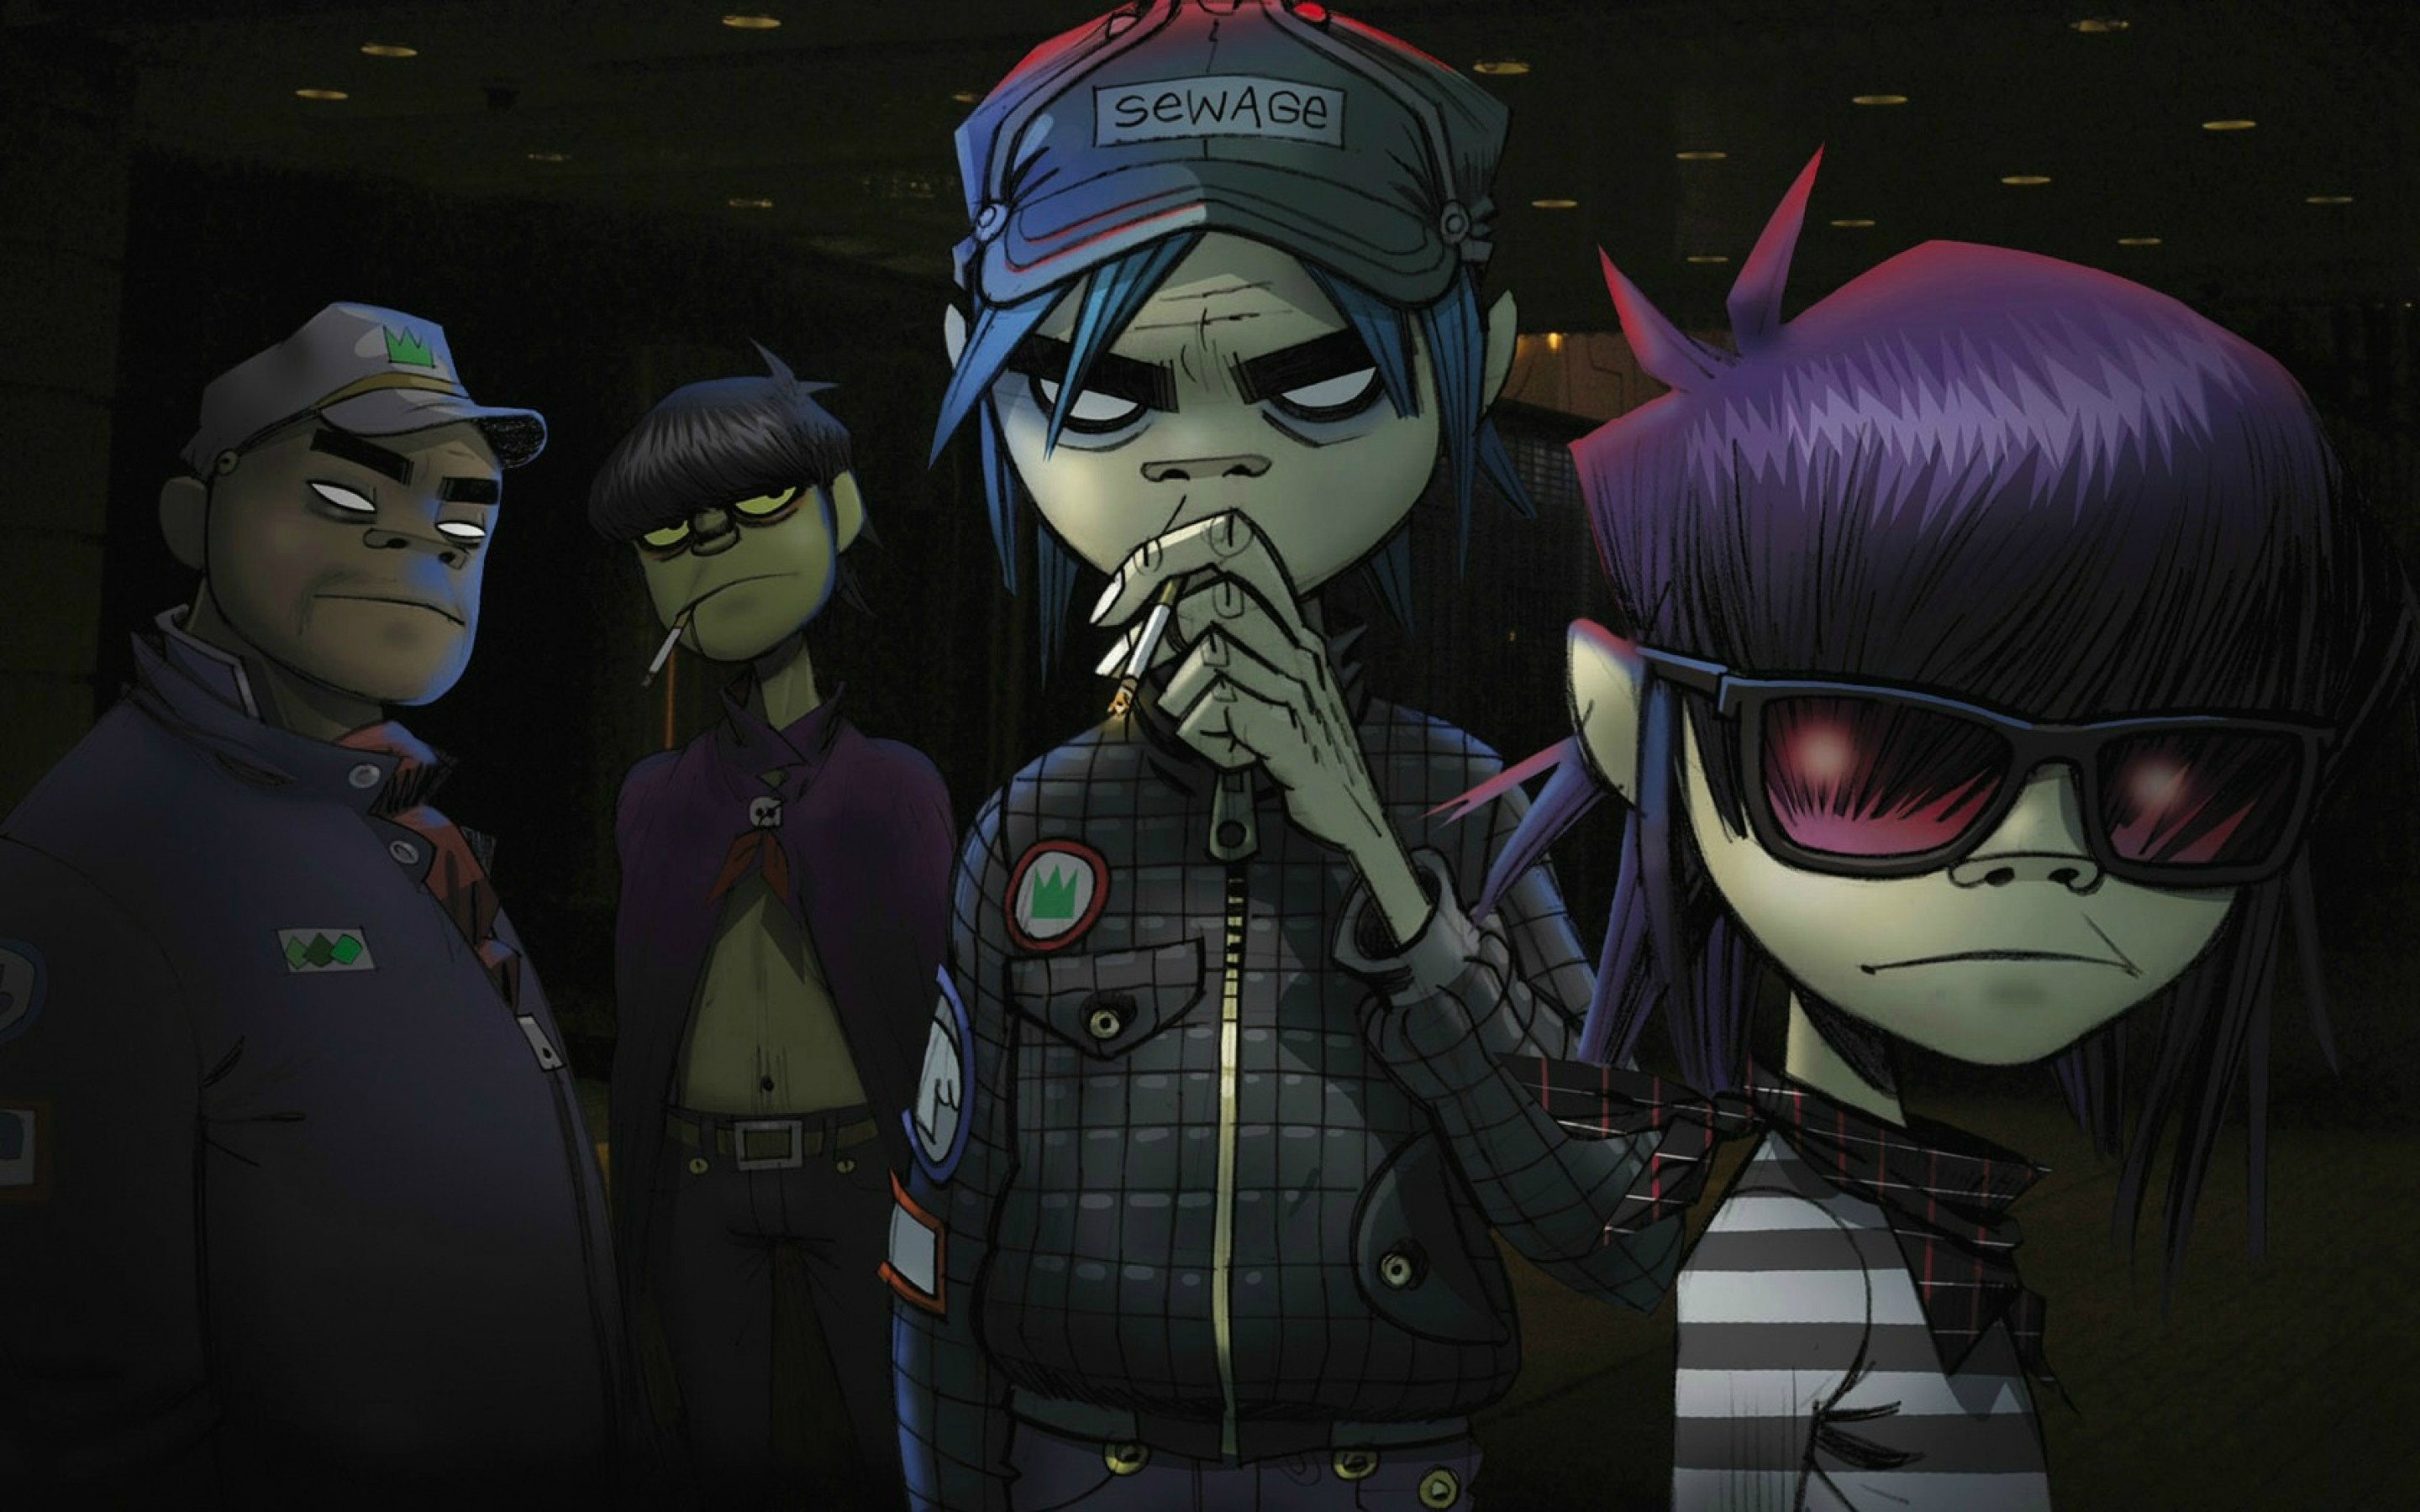 Gorillaz: World's favorite cartoon band, Projecting animated band members on stage via computer graphics. 2880x1800 HD Background.